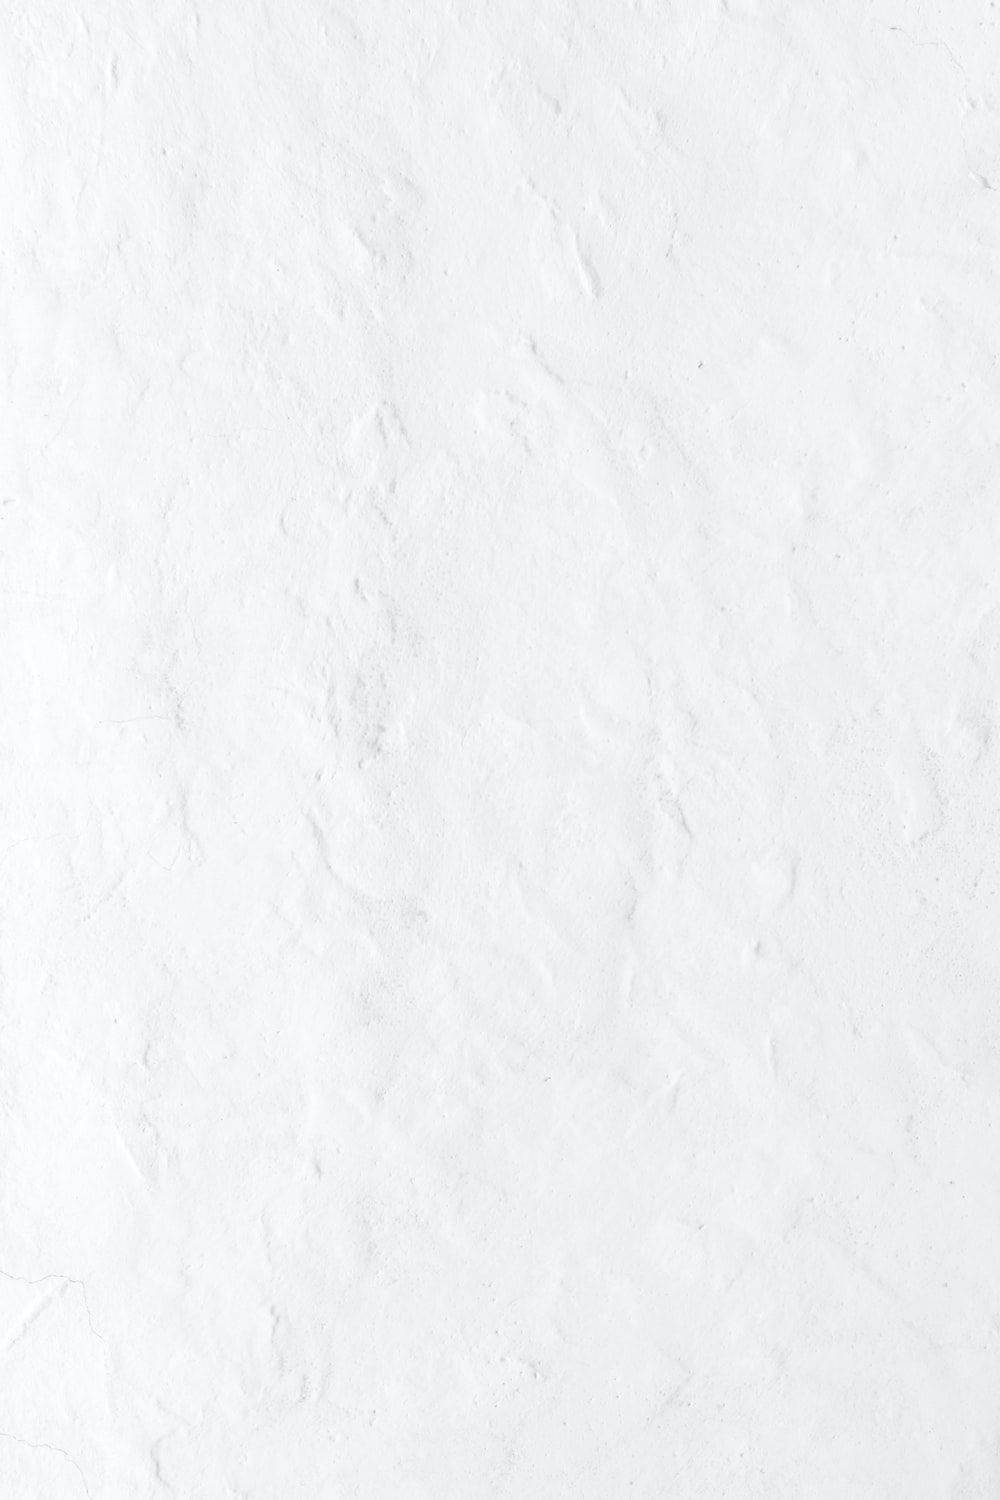 Blank White Cracked Paint Texture Background